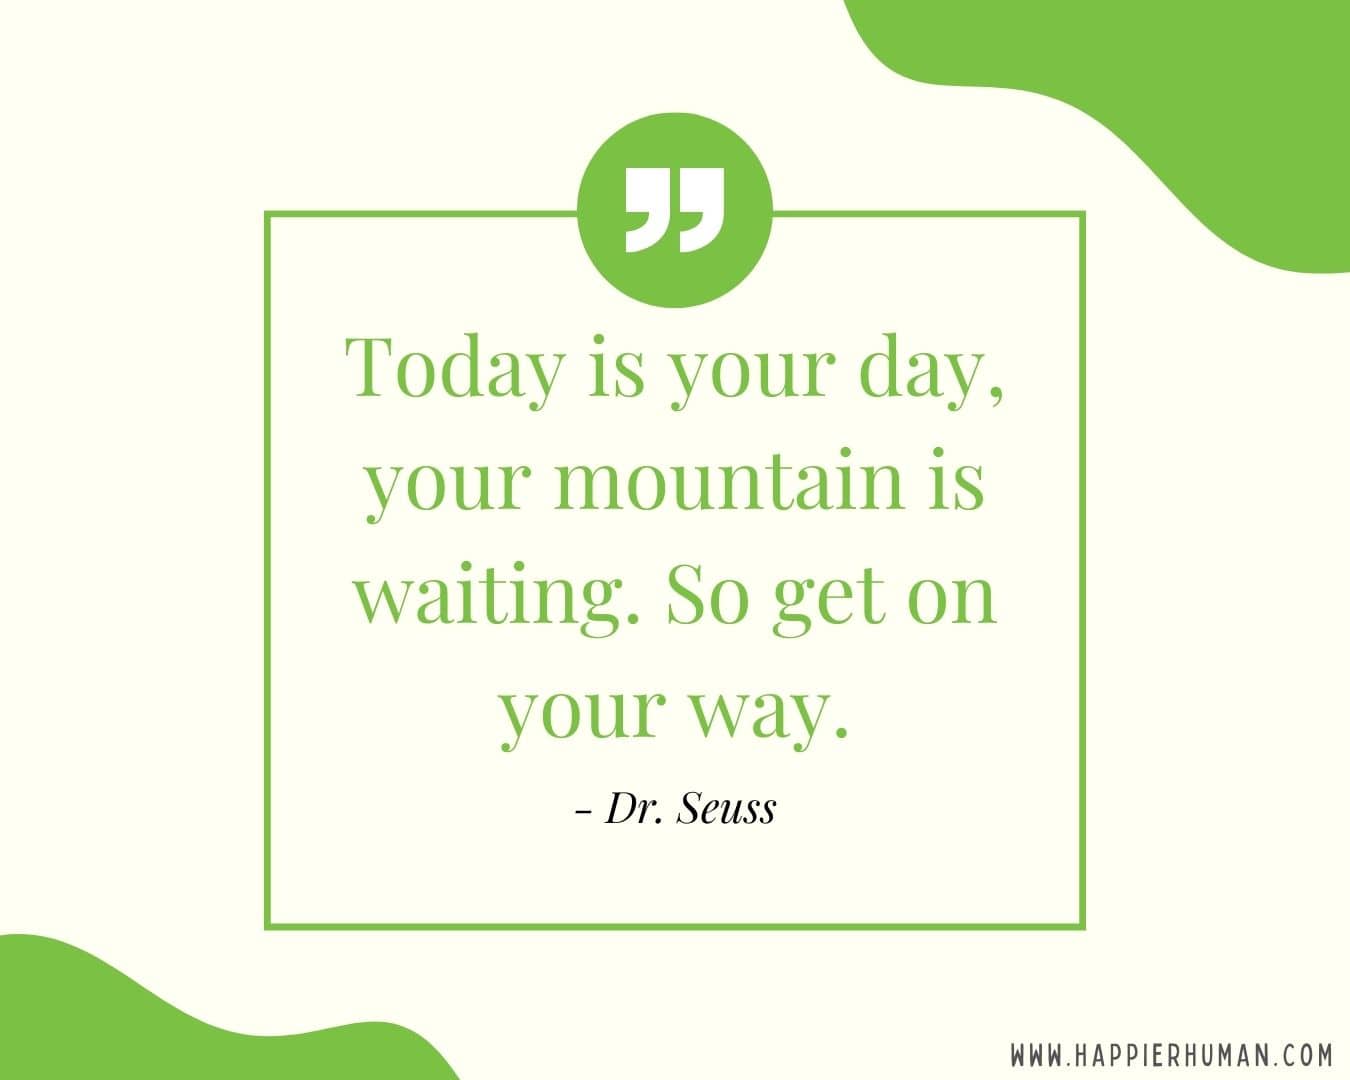 Great Day Quotes - “Today is your day, your mountain is waiting. So get on your way.” – Dr. Seuss